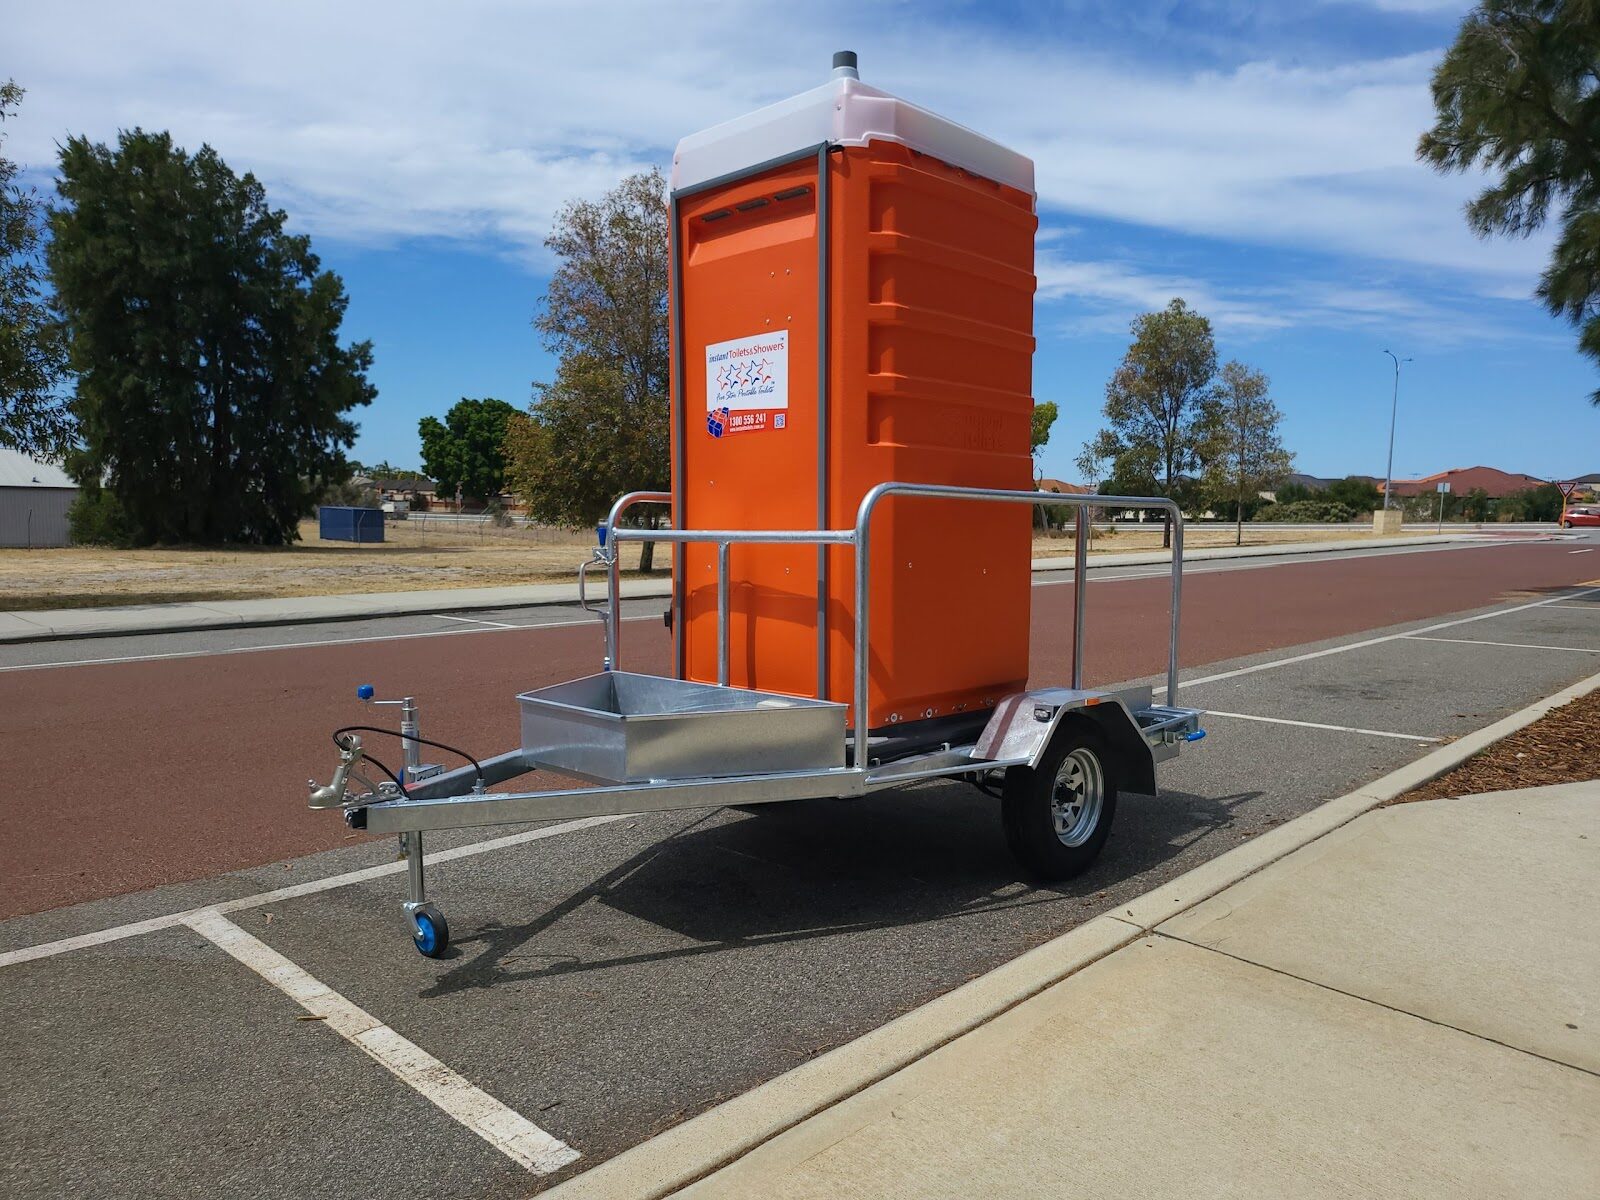 Orange Five Star Mobile Event Toilet on a trailer parked by a roadside.